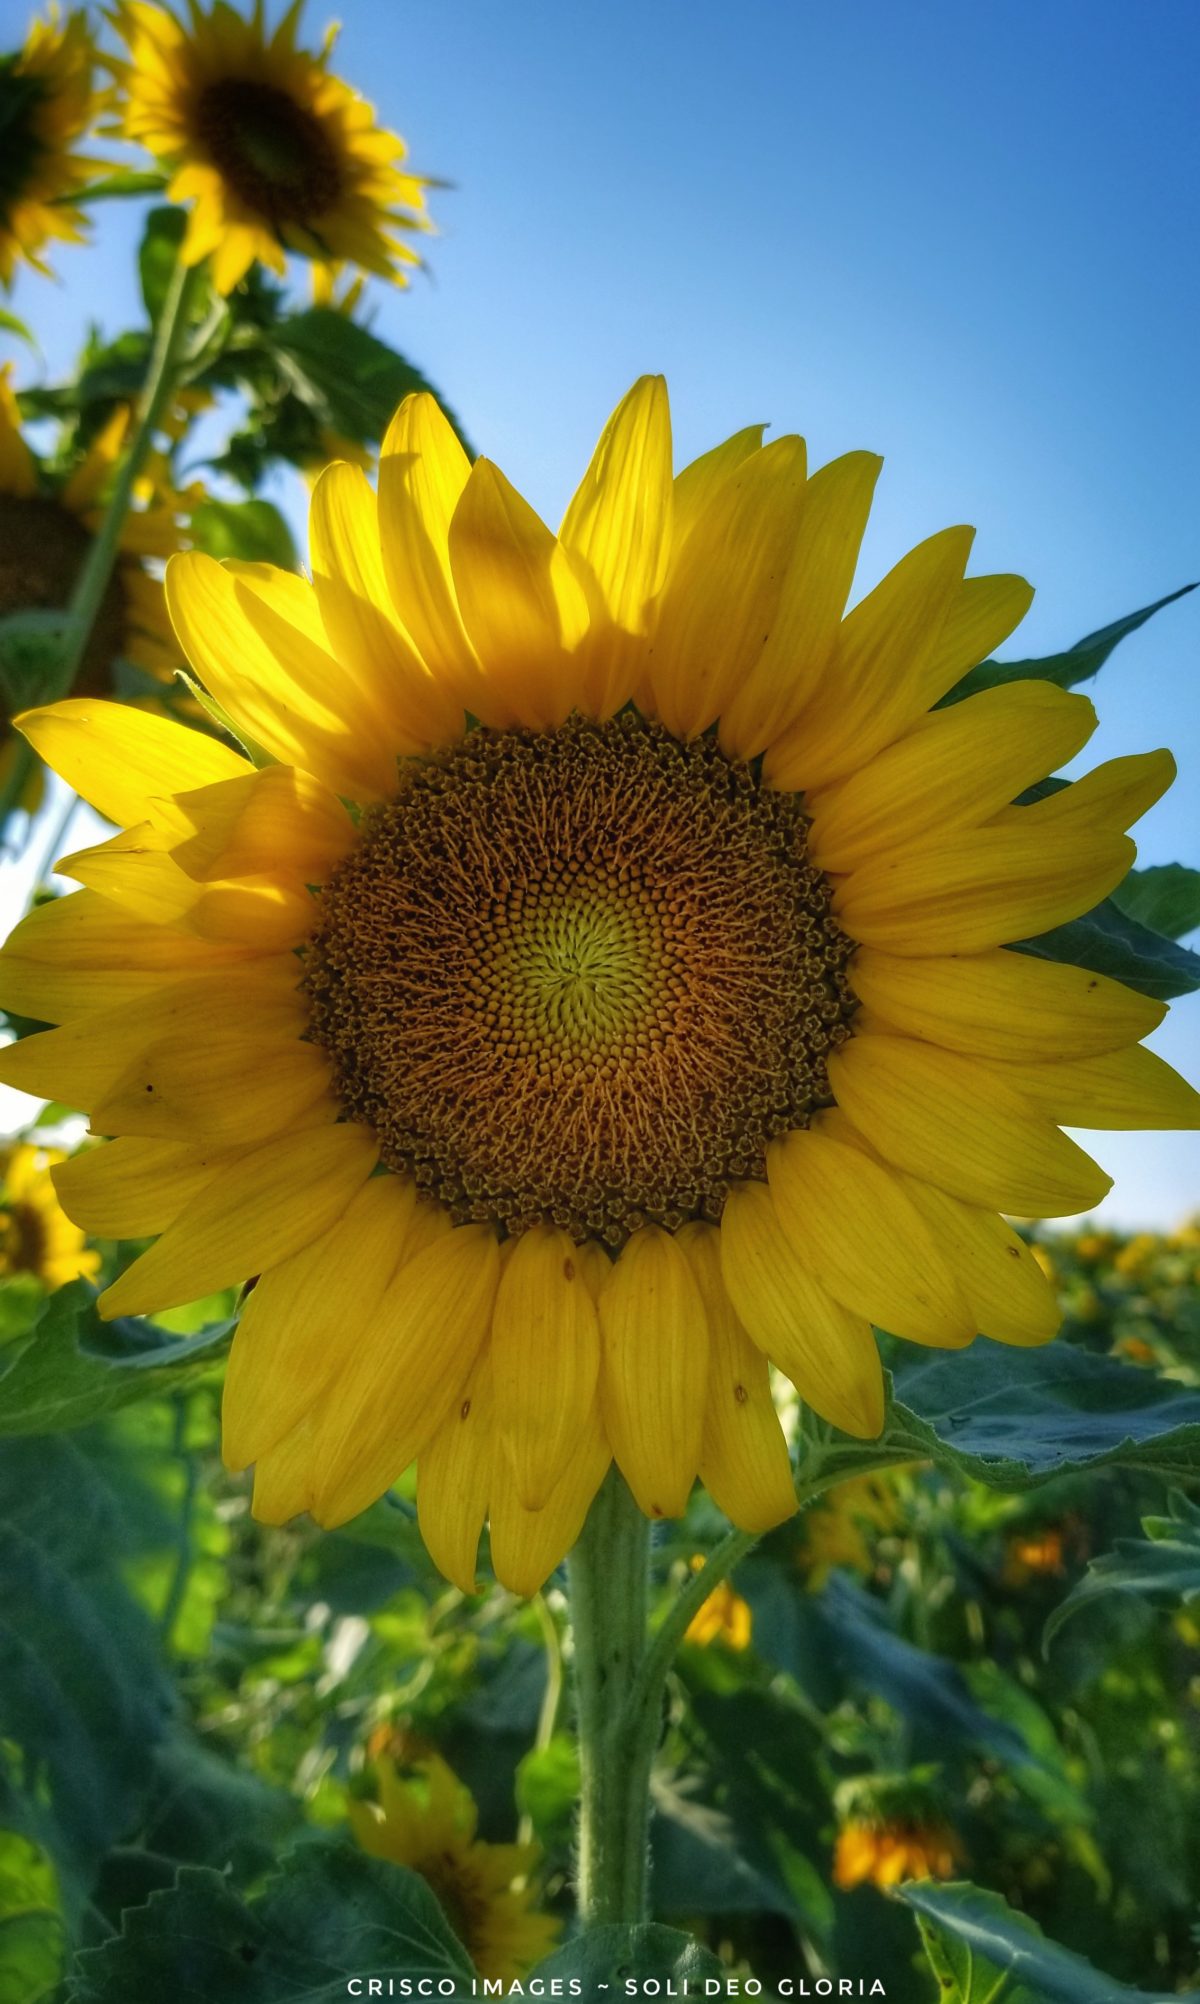 Sunflowers Stealing The Show In Dunnellon